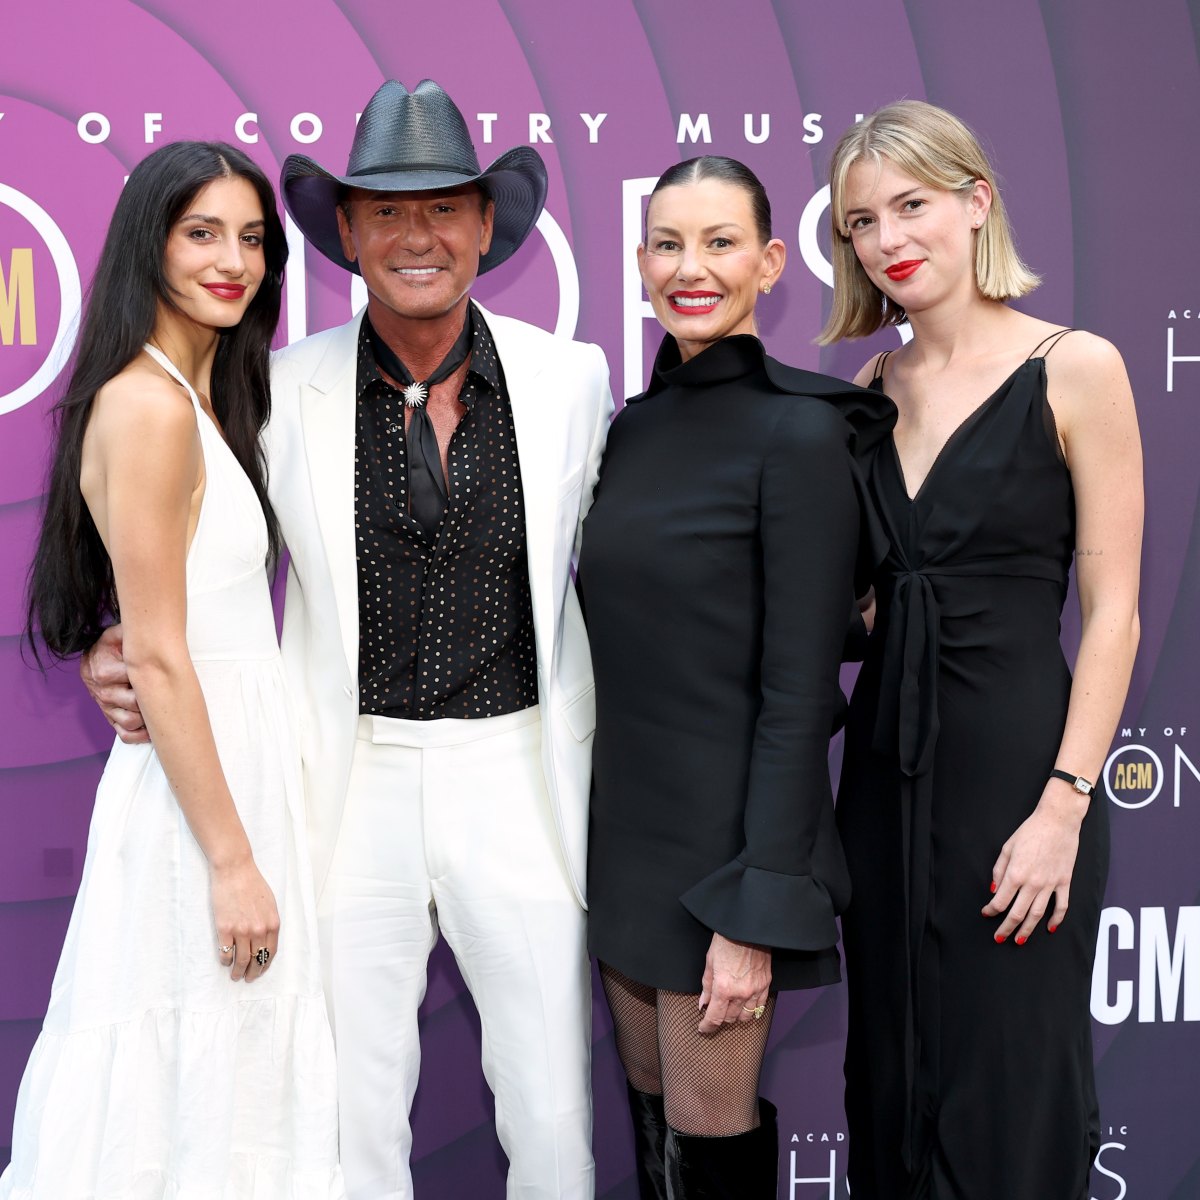 Tim McGraw shares hilarious reaction to daughter's kissing scene